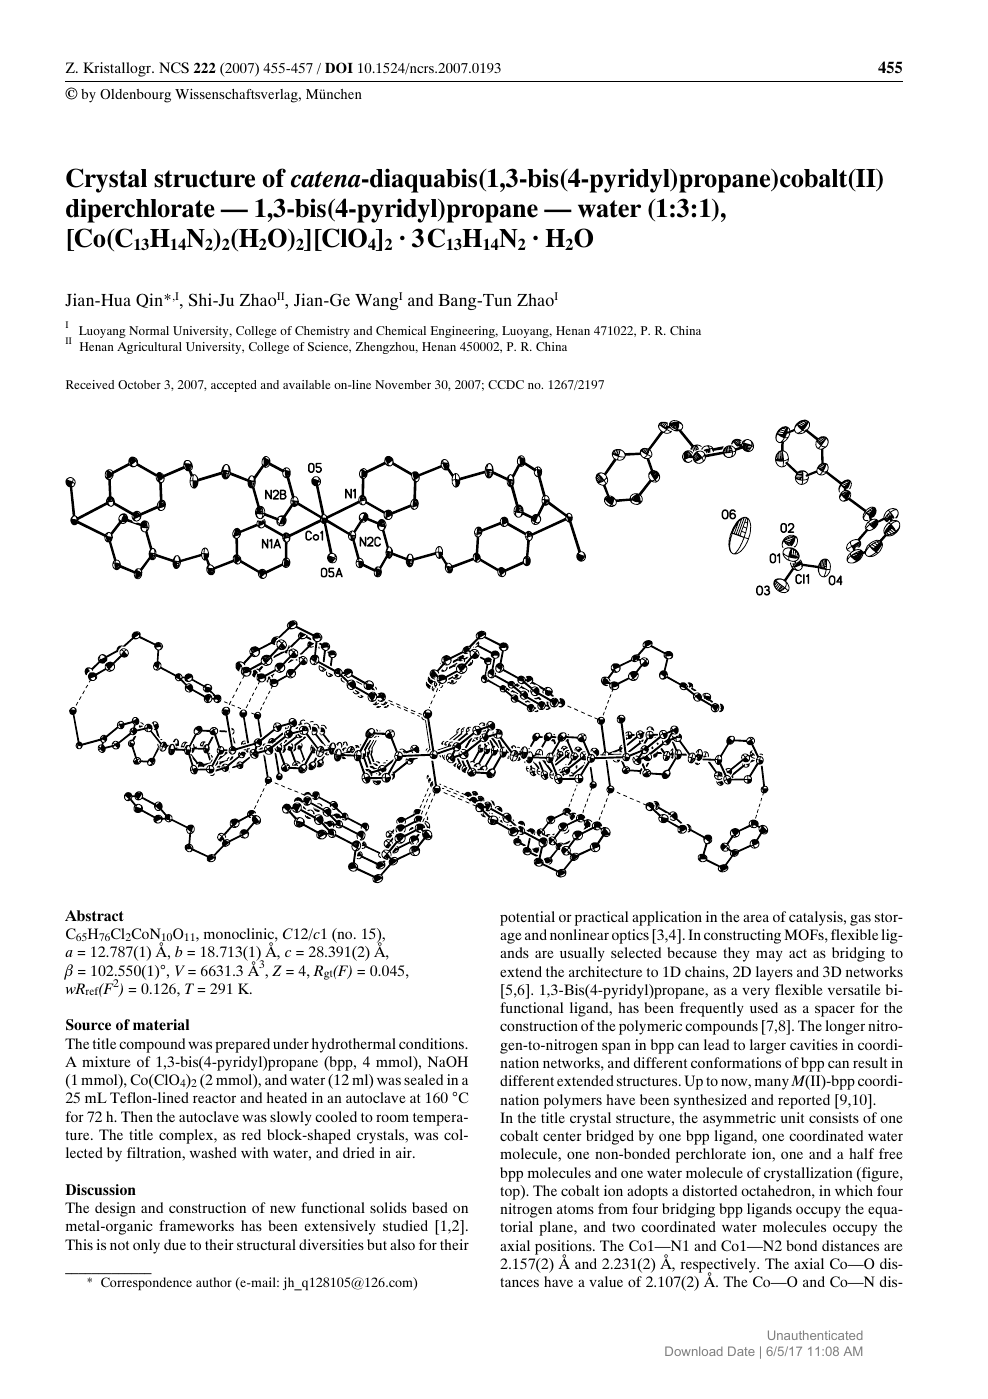 Crystal Structure Of Catena Diaquabis 1 3 Bis 4 Pyridyl Propane Cobalt Ii Diperchlorate 1 3 Bis 4 Pyridyl Propane Water 1 3 1 Co C13h14n2 2 H2o 2 Clo4 2 3c13h14n2 H2o Topic Of Research Paper In Chemical Sciences Download Scholarly